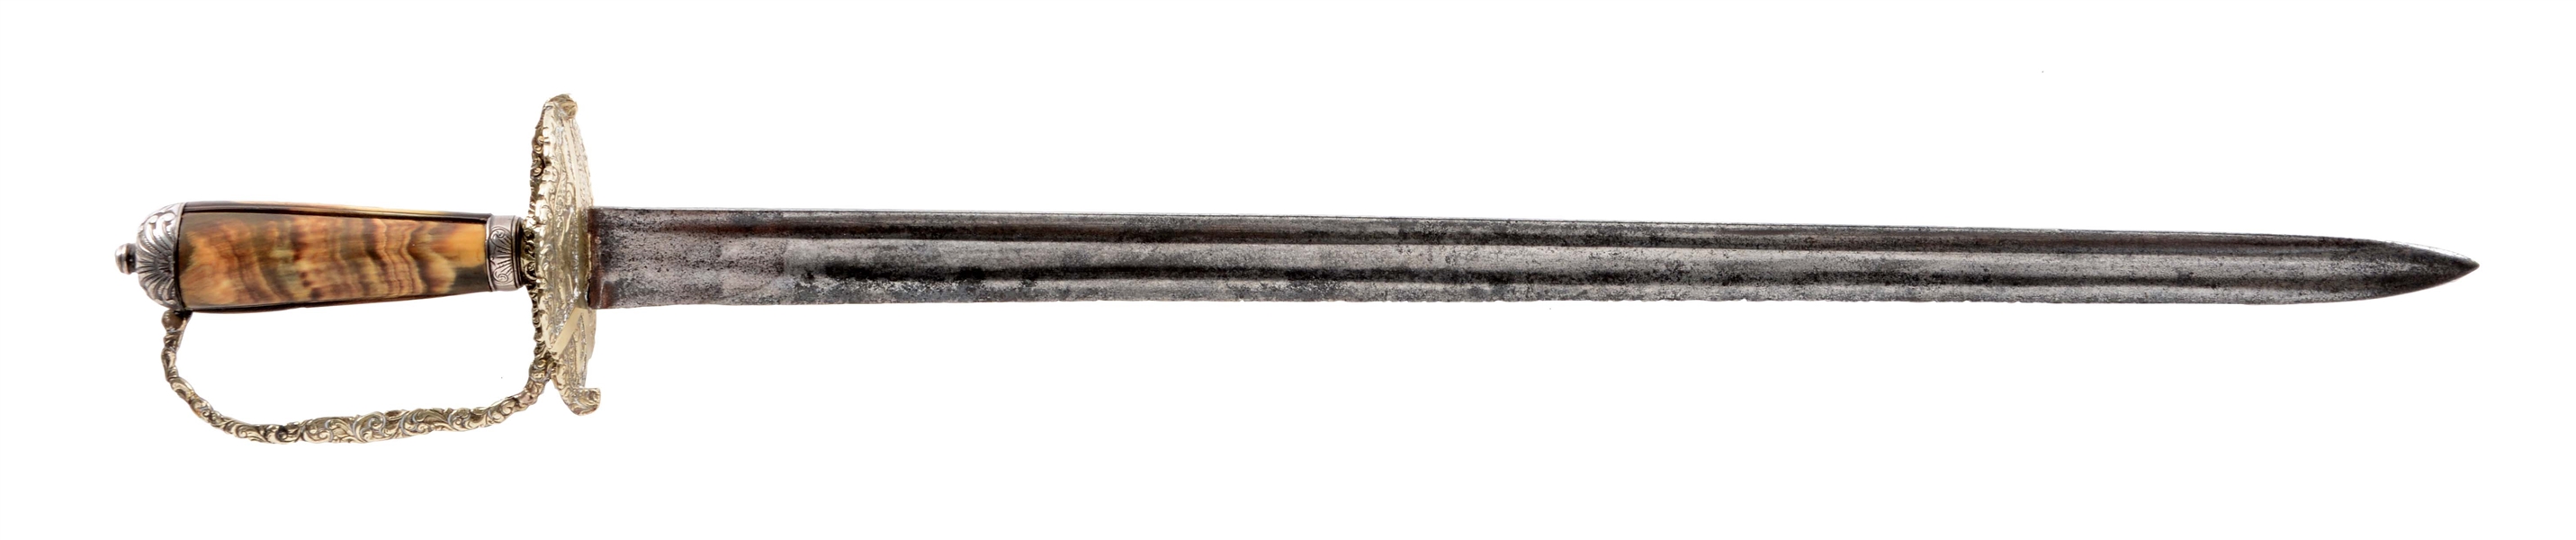 SILVER-HILTED 18TH CENTURY HUNTING SHORT SWORD MARKED PRICE.